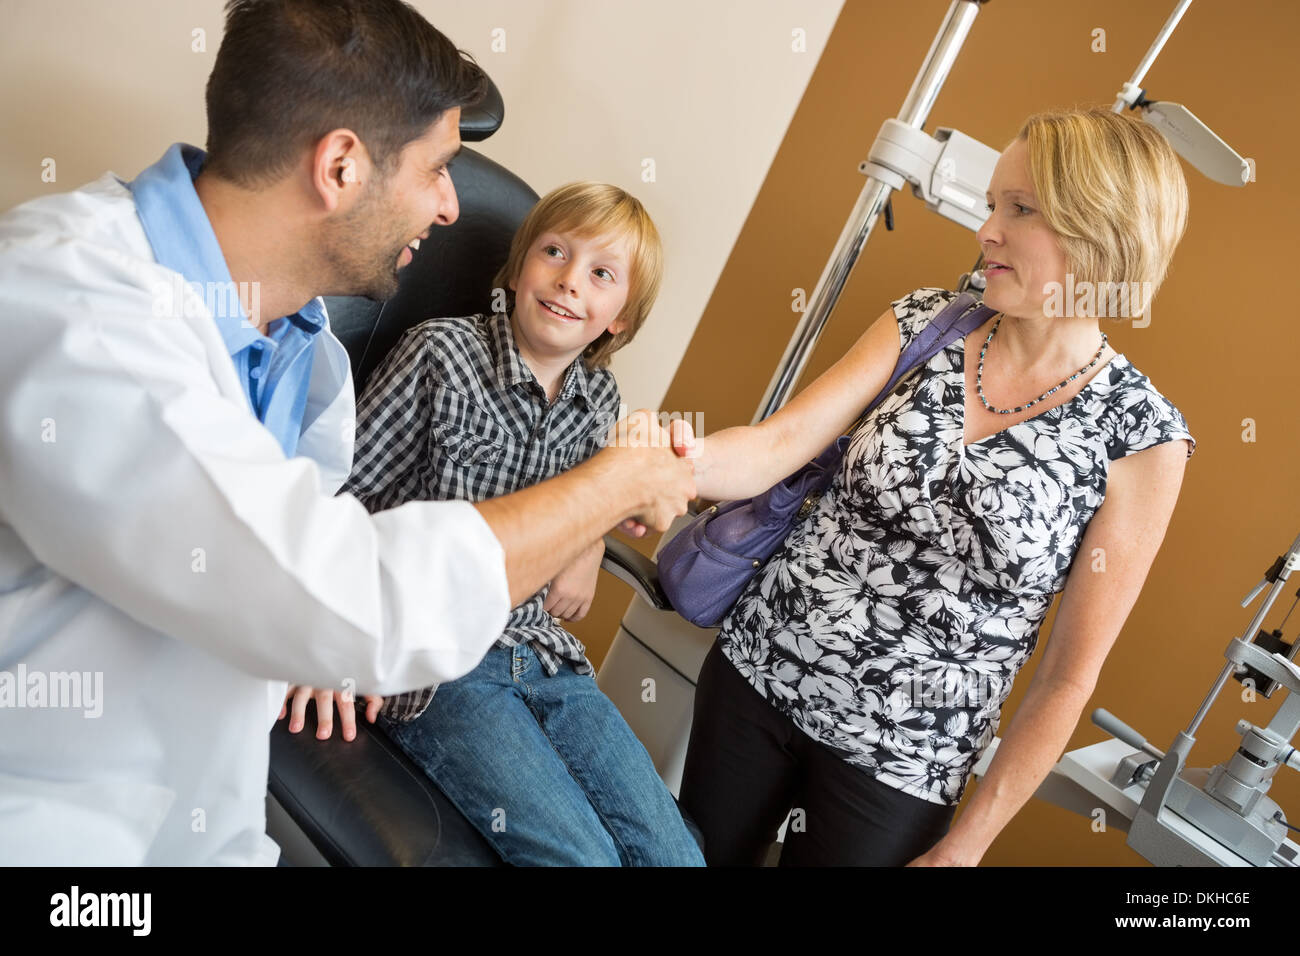 Optician And Woman Shaking Hands By Boy Stock Photo